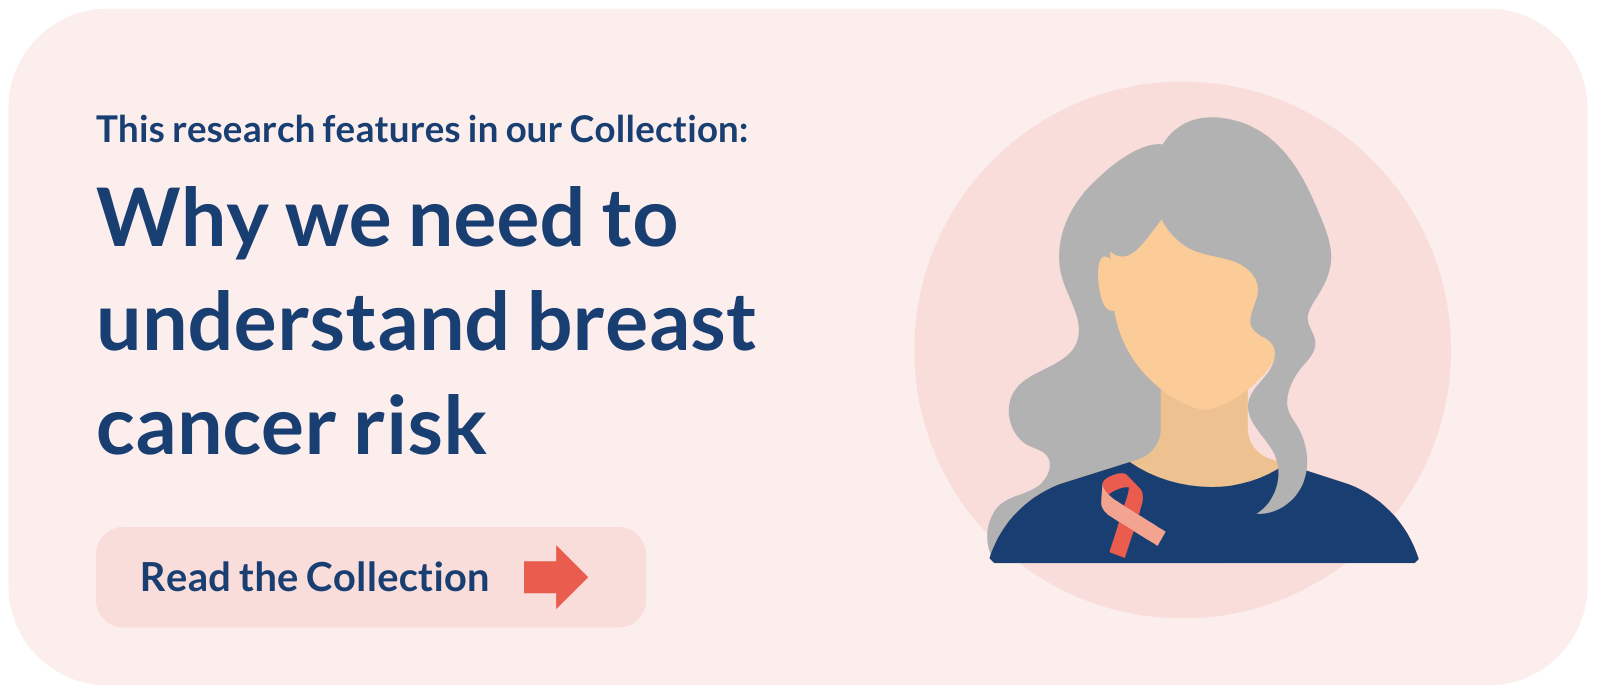 This research features in our Collection: Why we need to understand breast cancer risk. Read the Collection